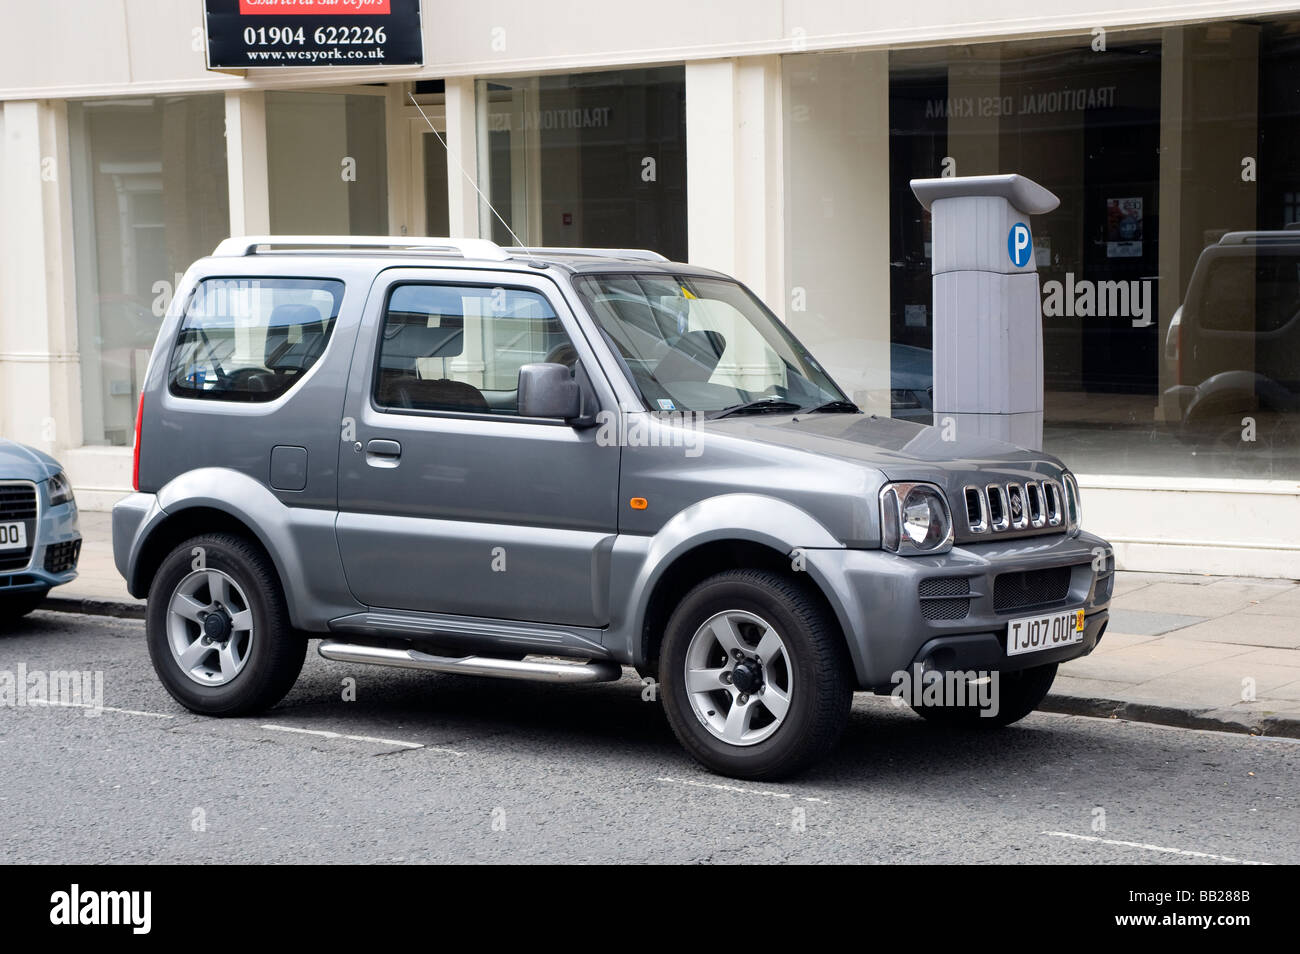 Suzuki Jimny car parked by a parking meter on a city street in England Stock Photo